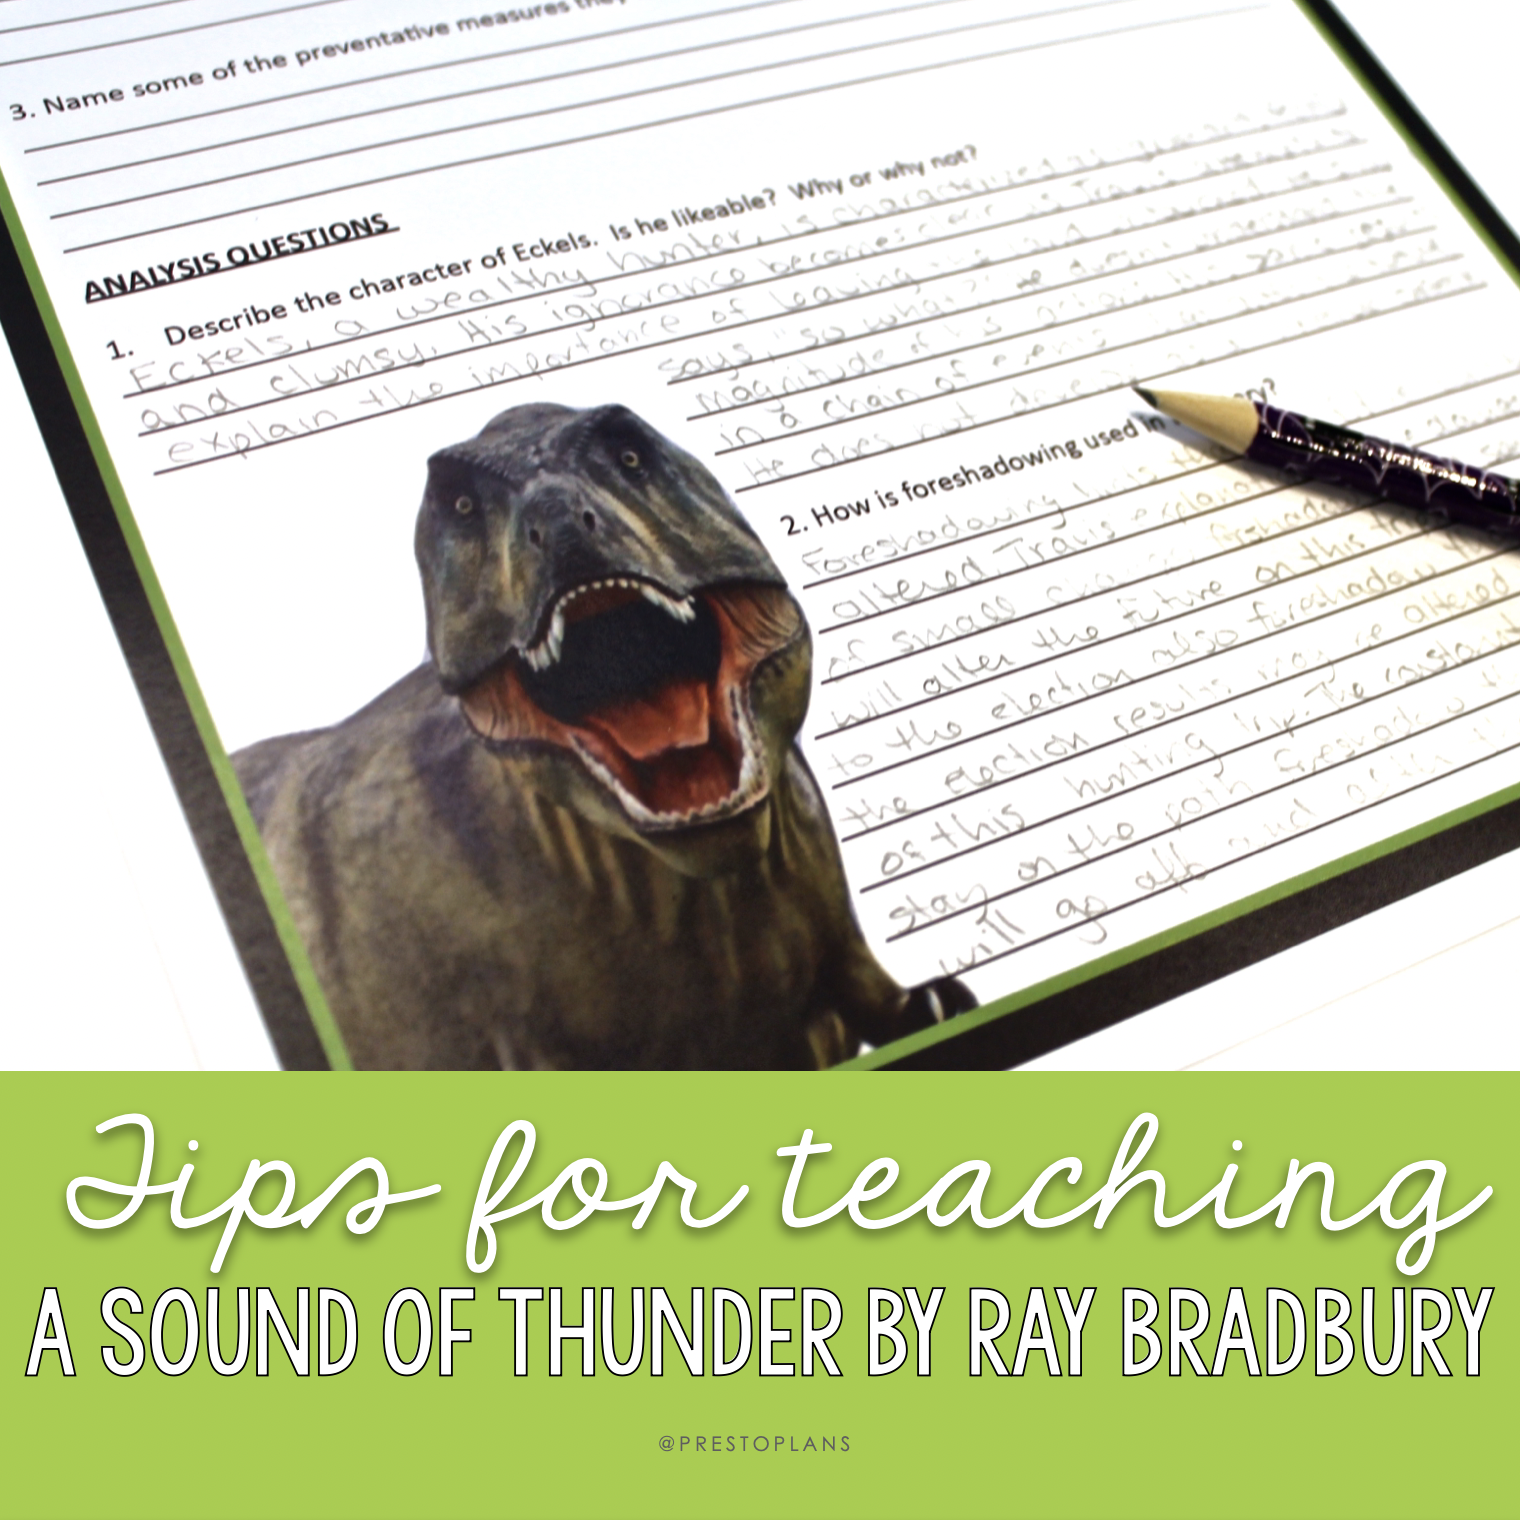 Tips for teaching "A Sound of Thunder" by Ray Bradbury